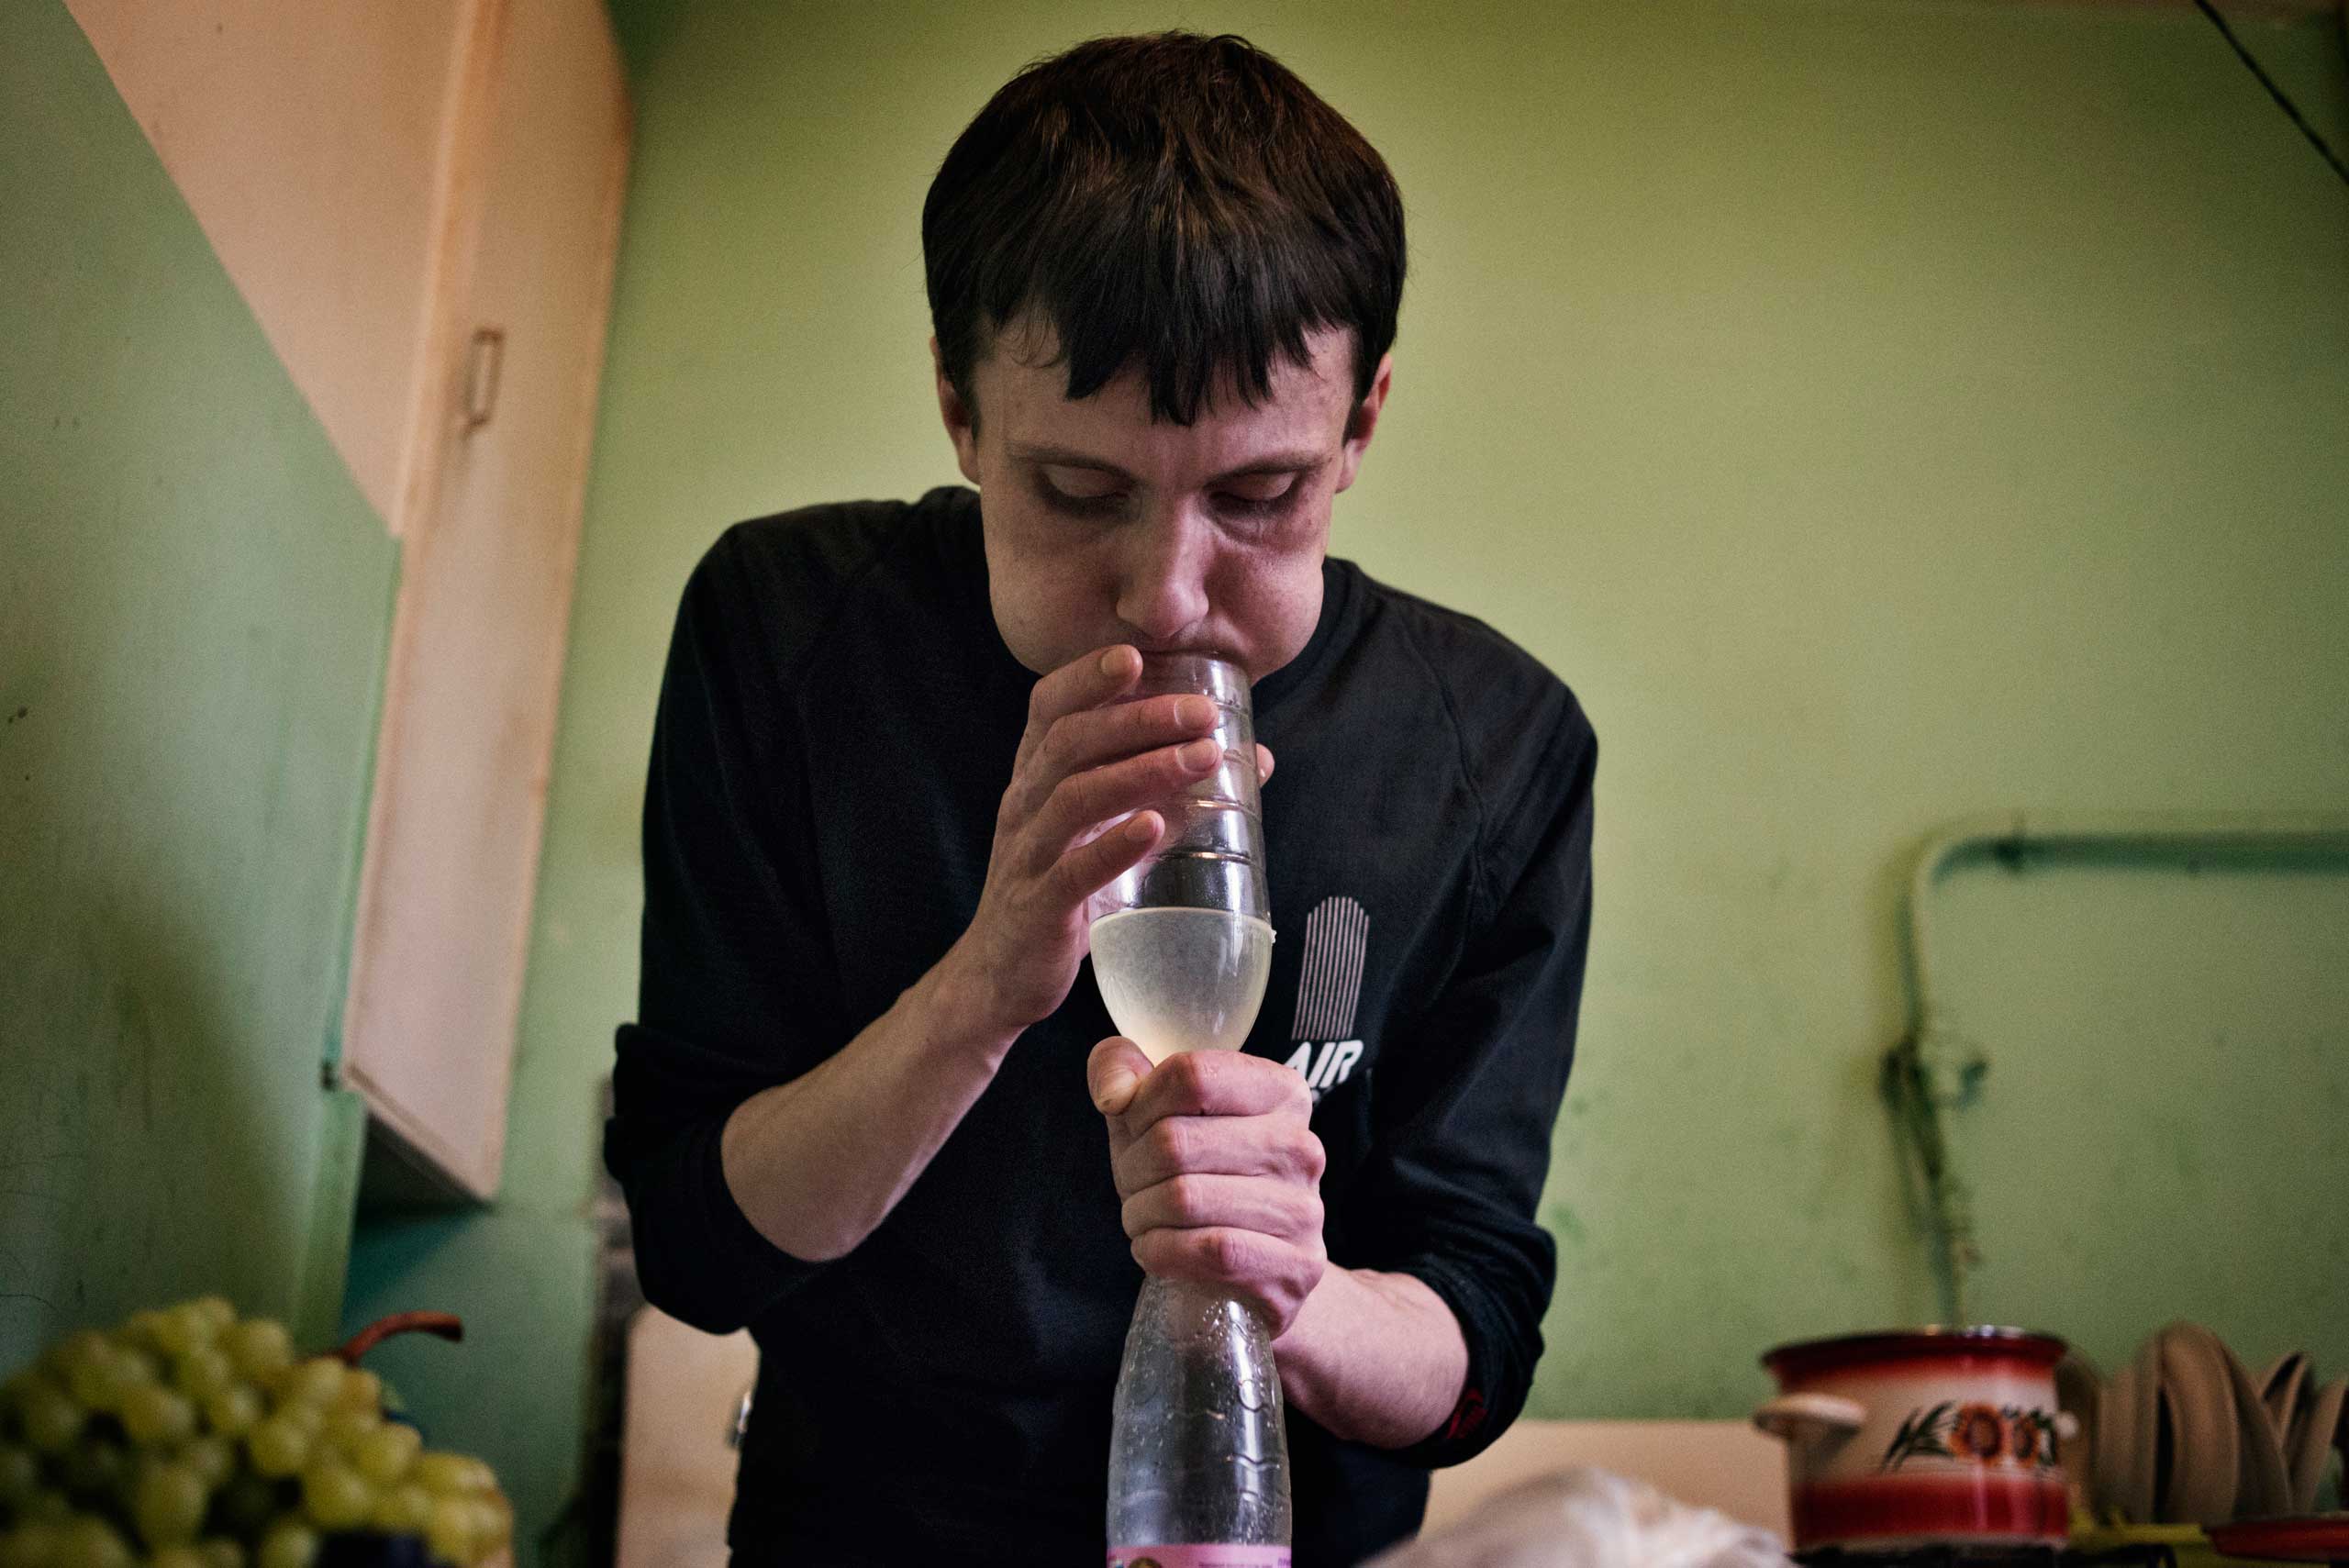 Alexey, 30 years old, blows air in a bottle to push the liquid through a filter and use it to prepare the krokodil.